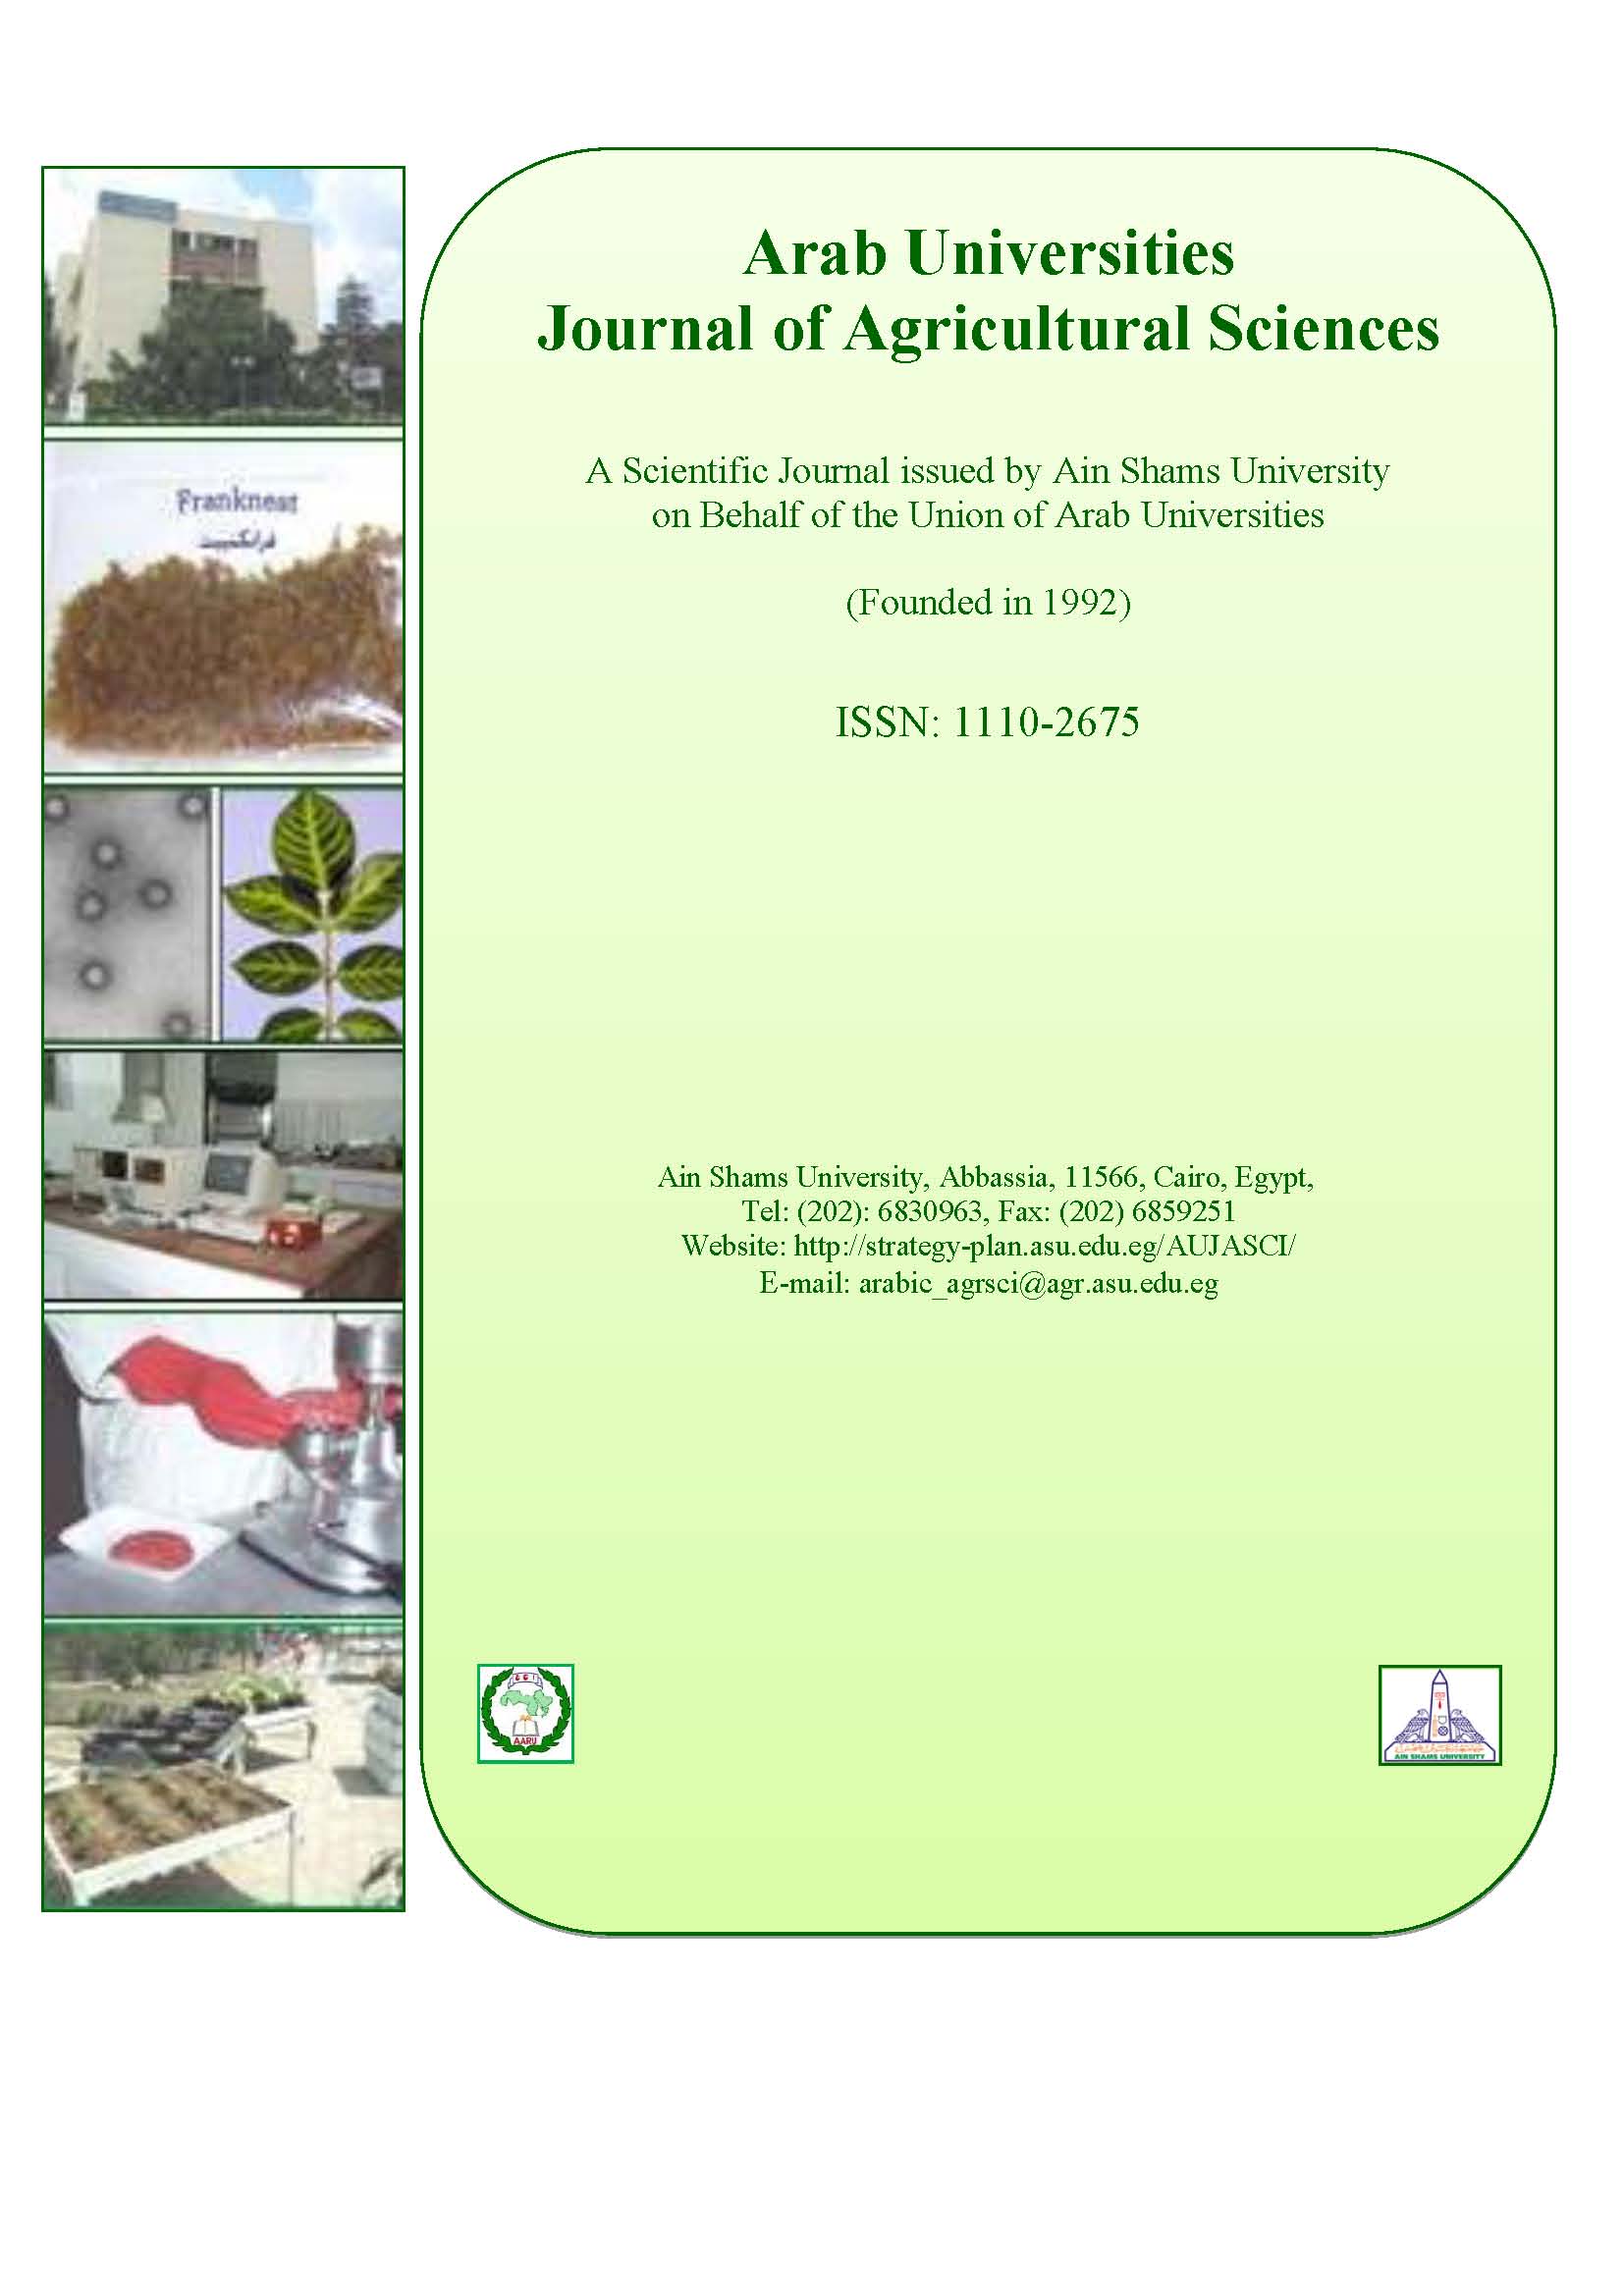 Arab Universities Journal of Agricultural Sciences